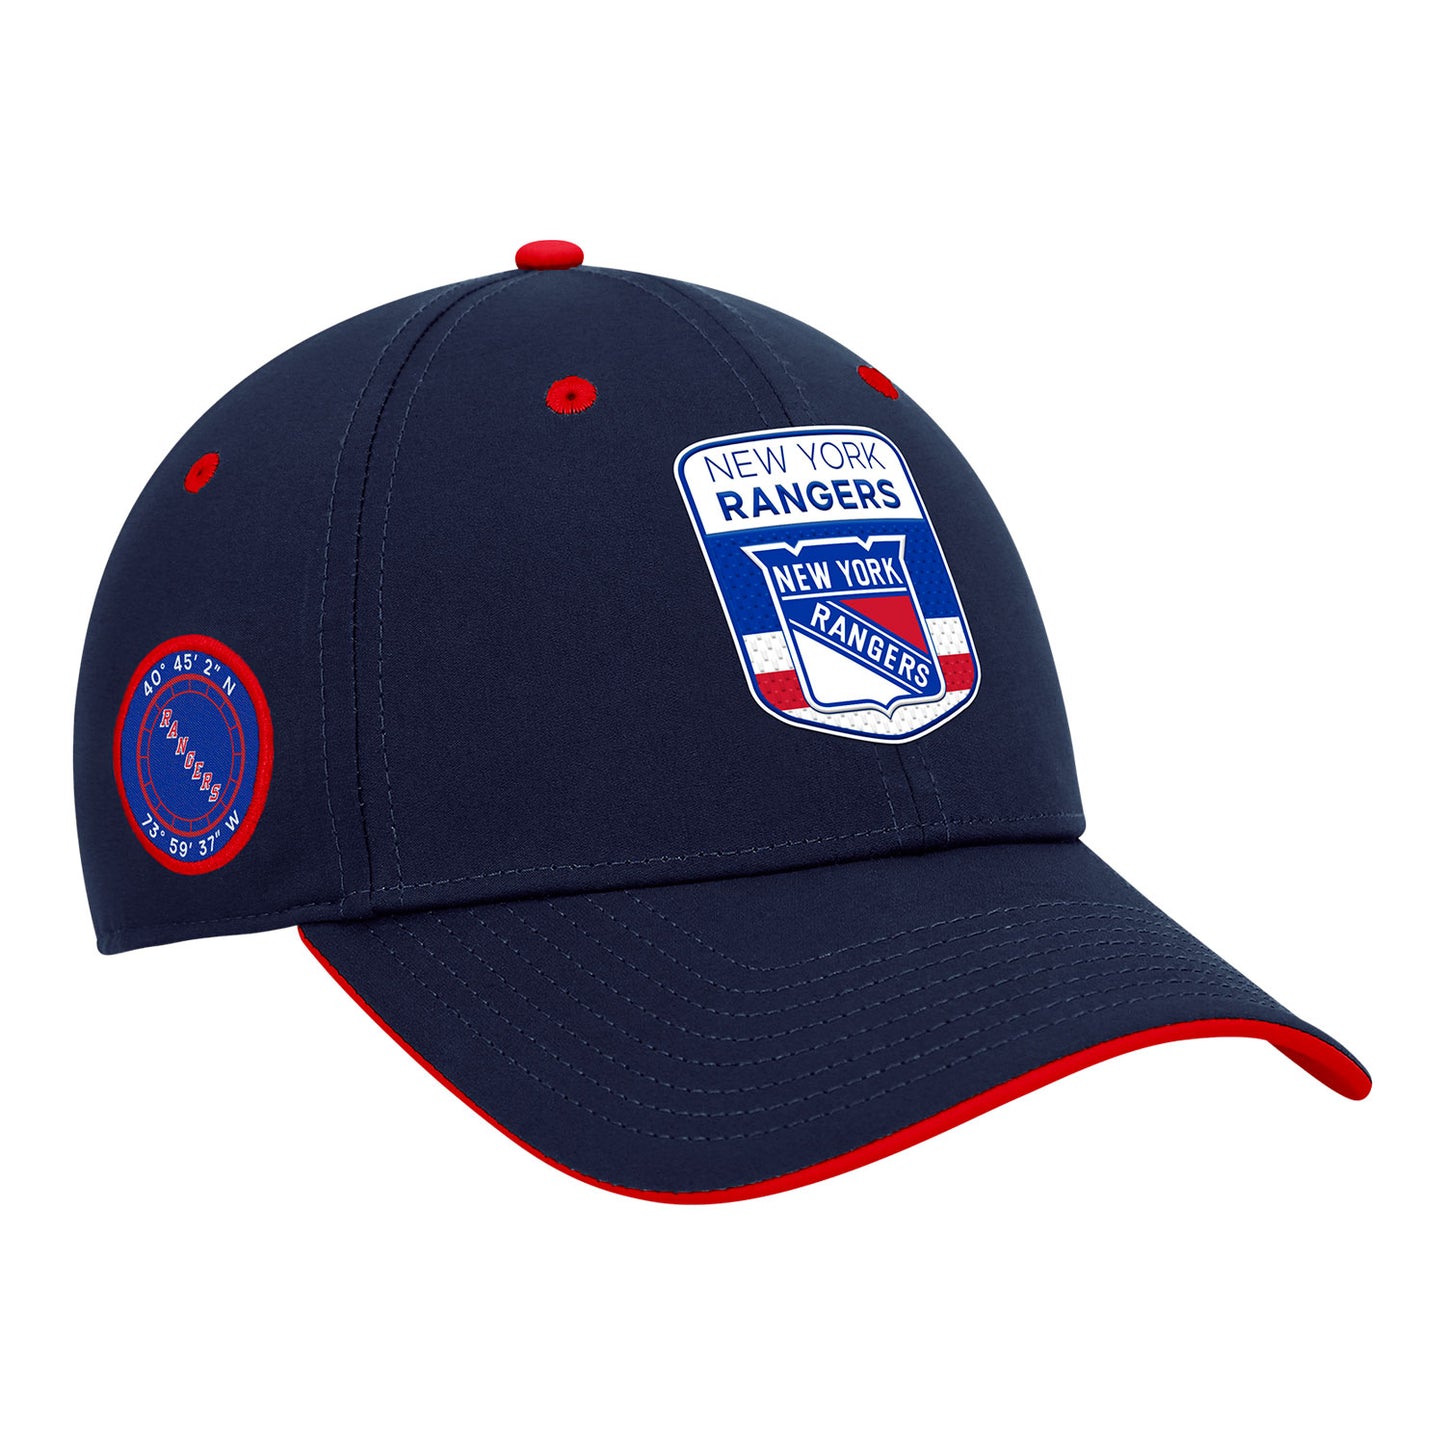 Fanatics Rangers 23 Authentic Pro Draft Structured Stretch Hat - In Navy - Angled Right View